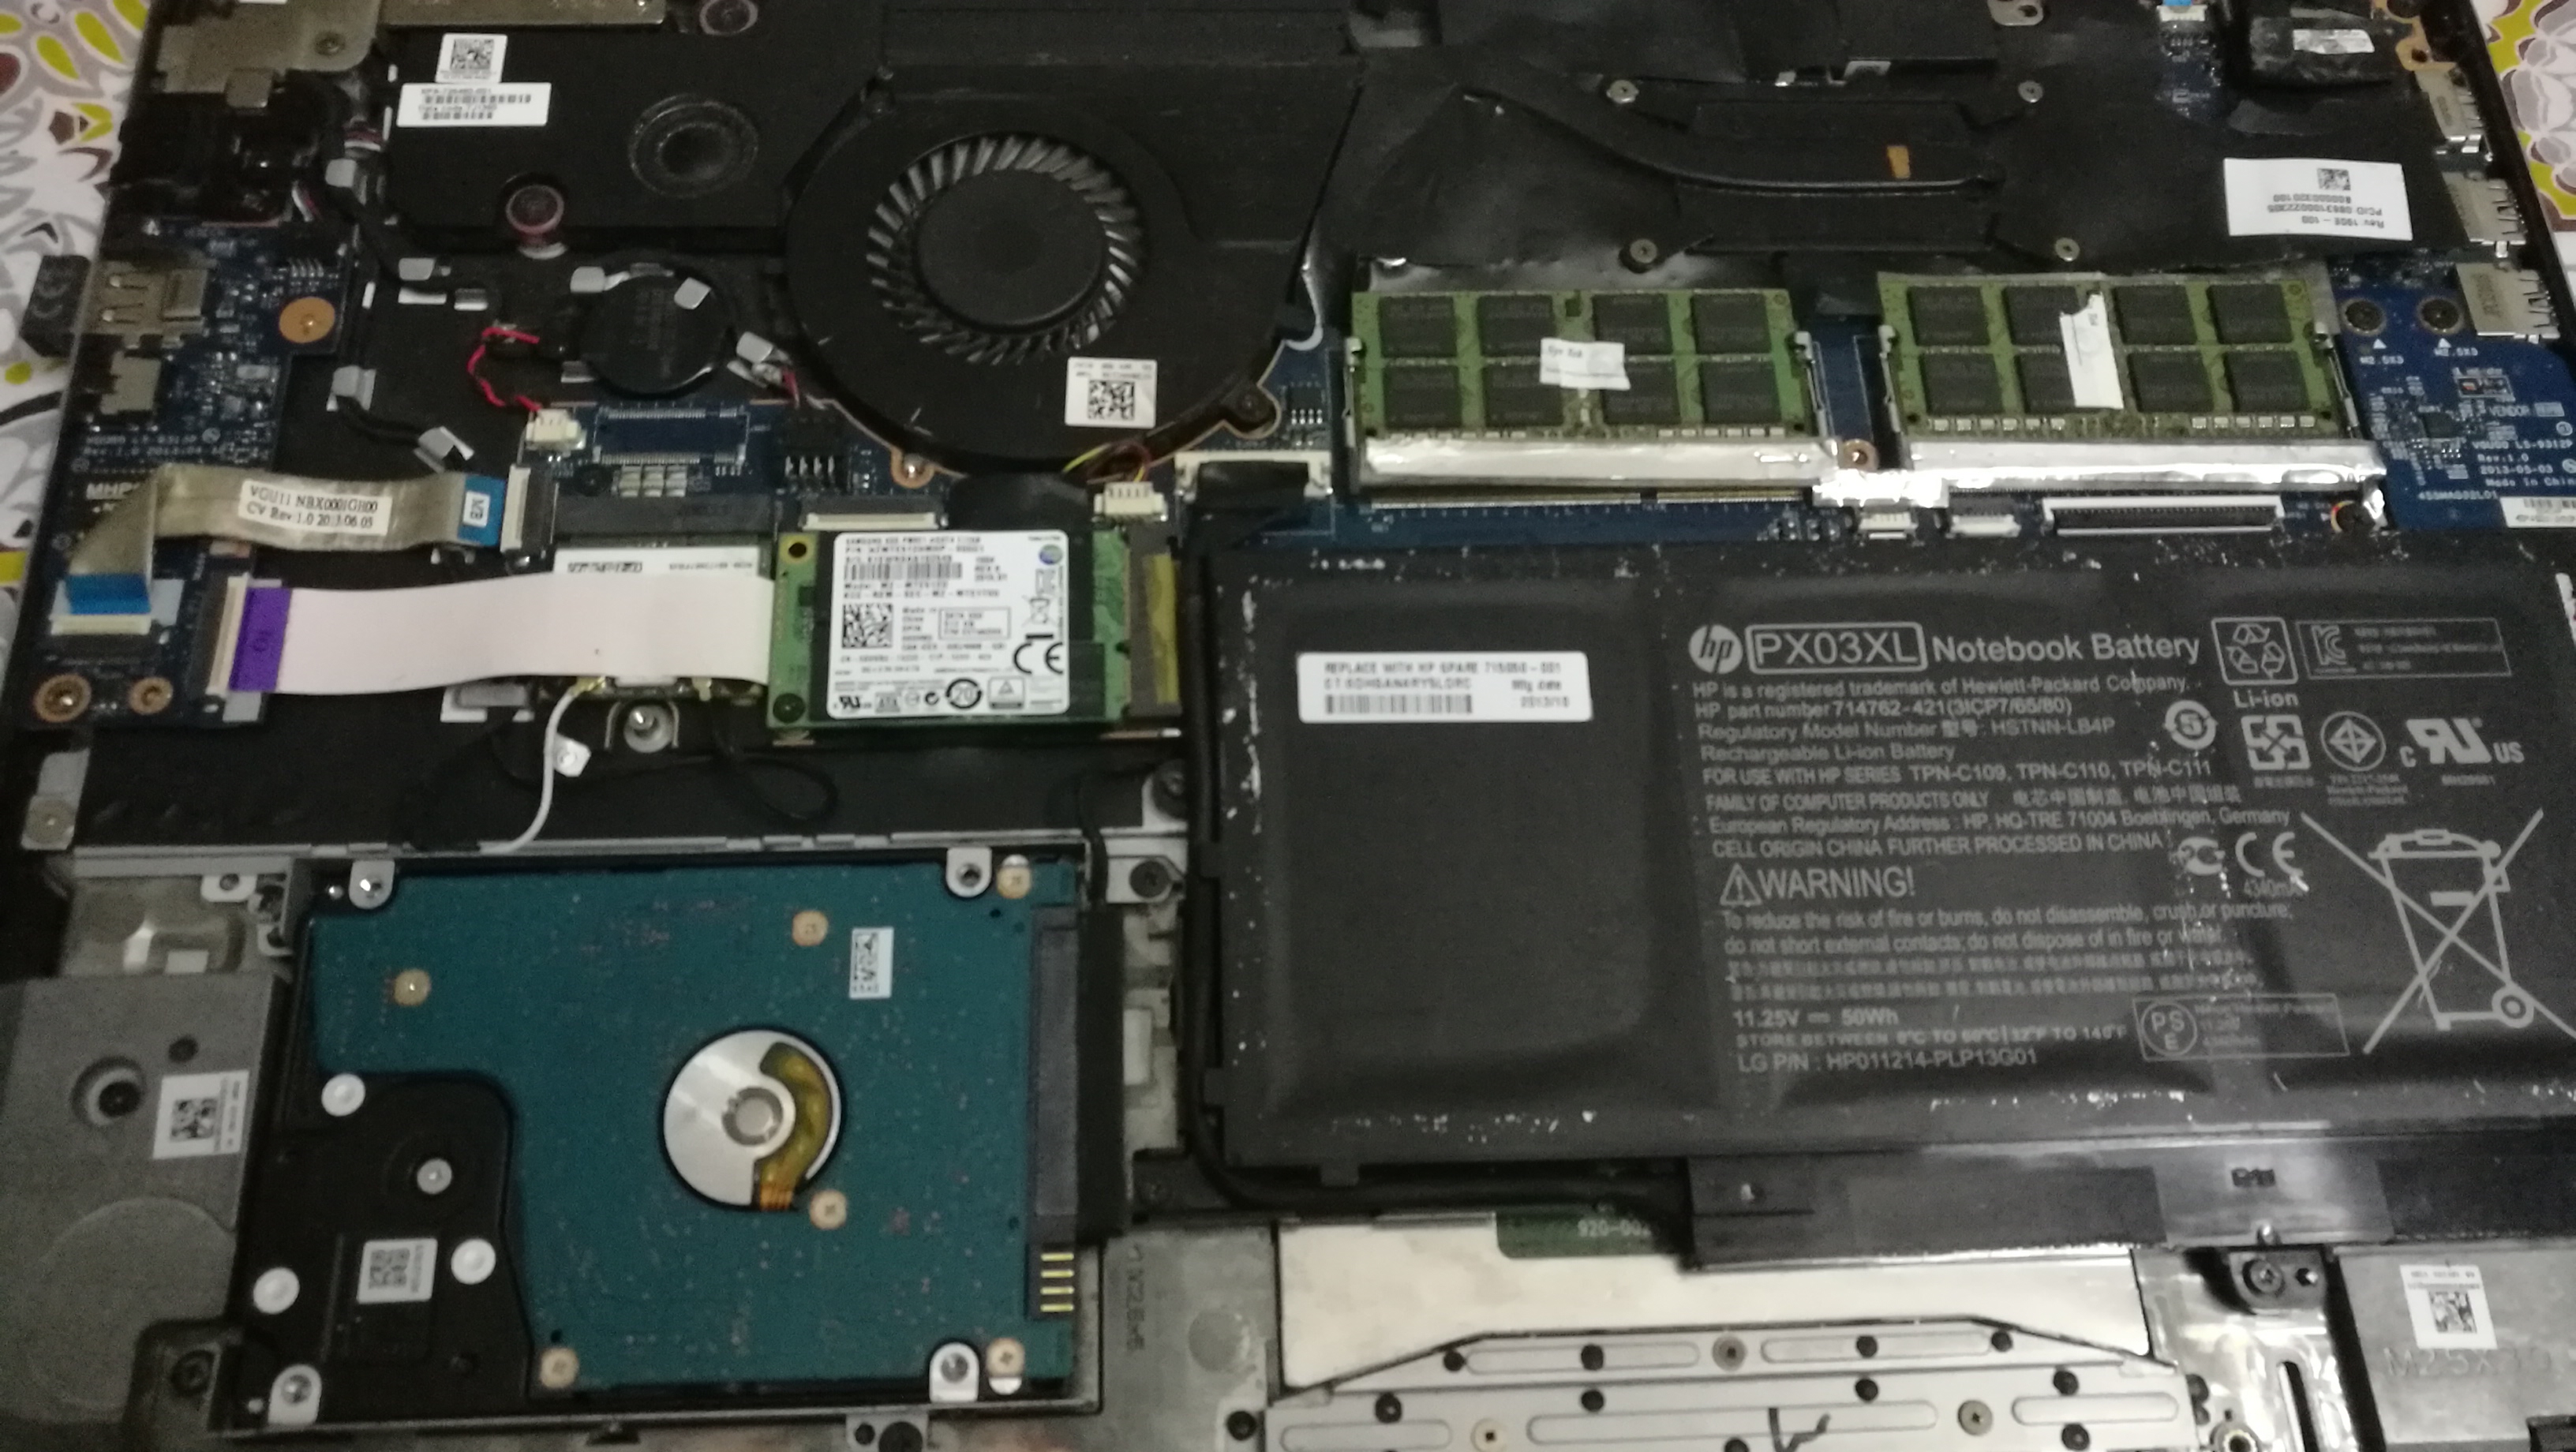 HP-Envy m6-k025dx dont recognize OS after mSATA mini SSD upg... - HP  Support Community - 6999697